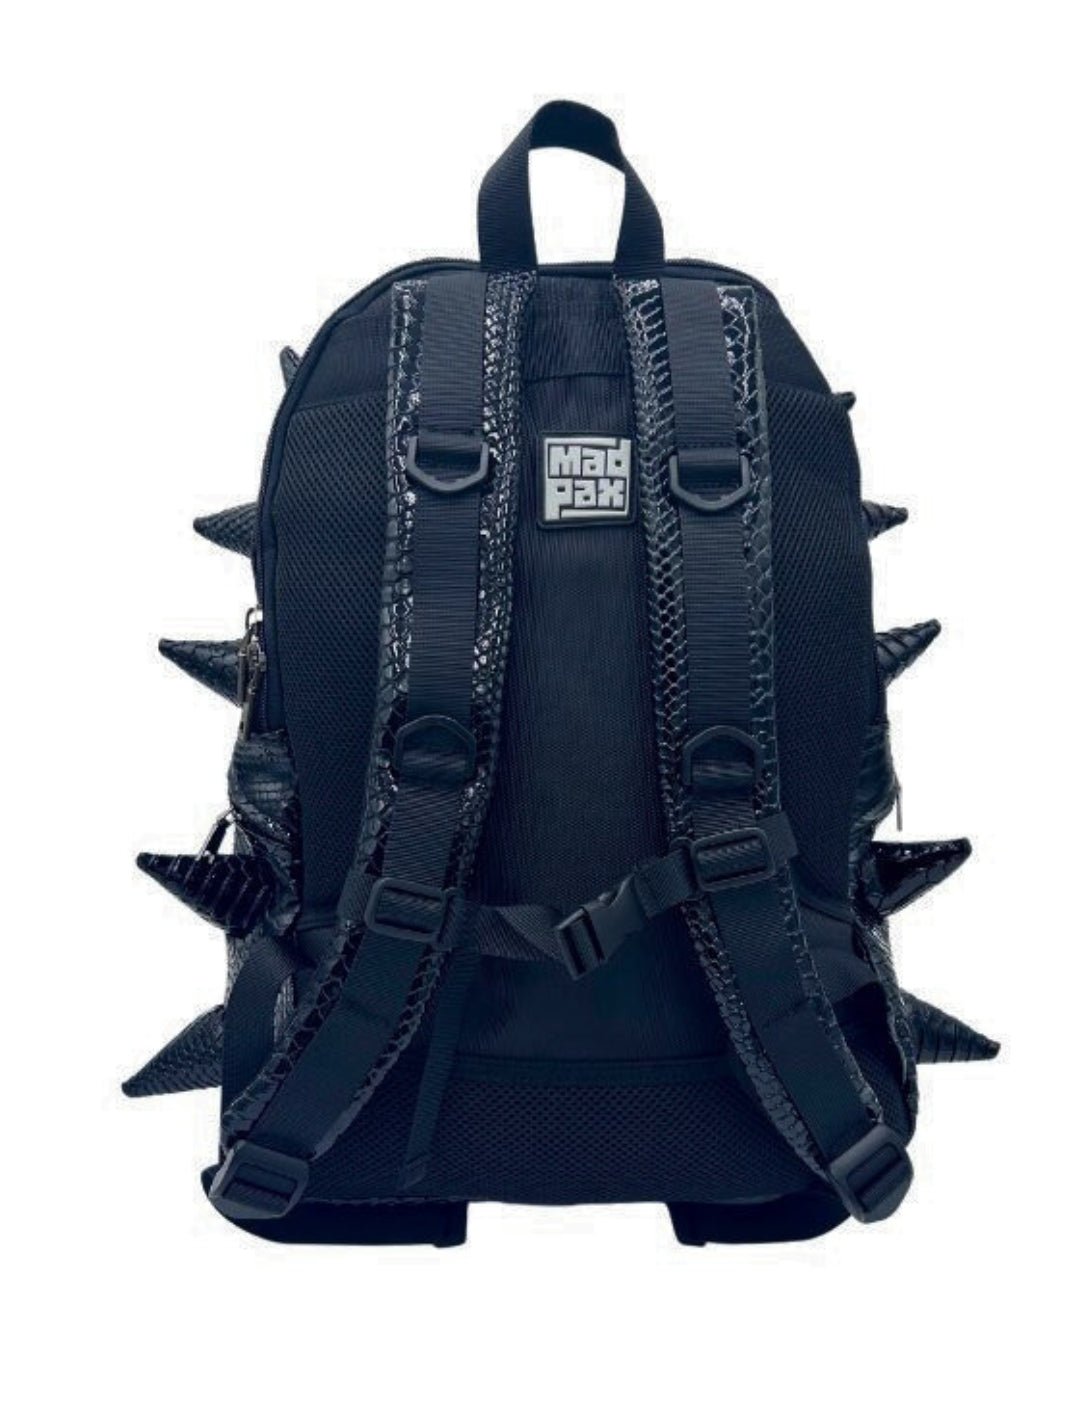 Black Out Backpack - Madpax